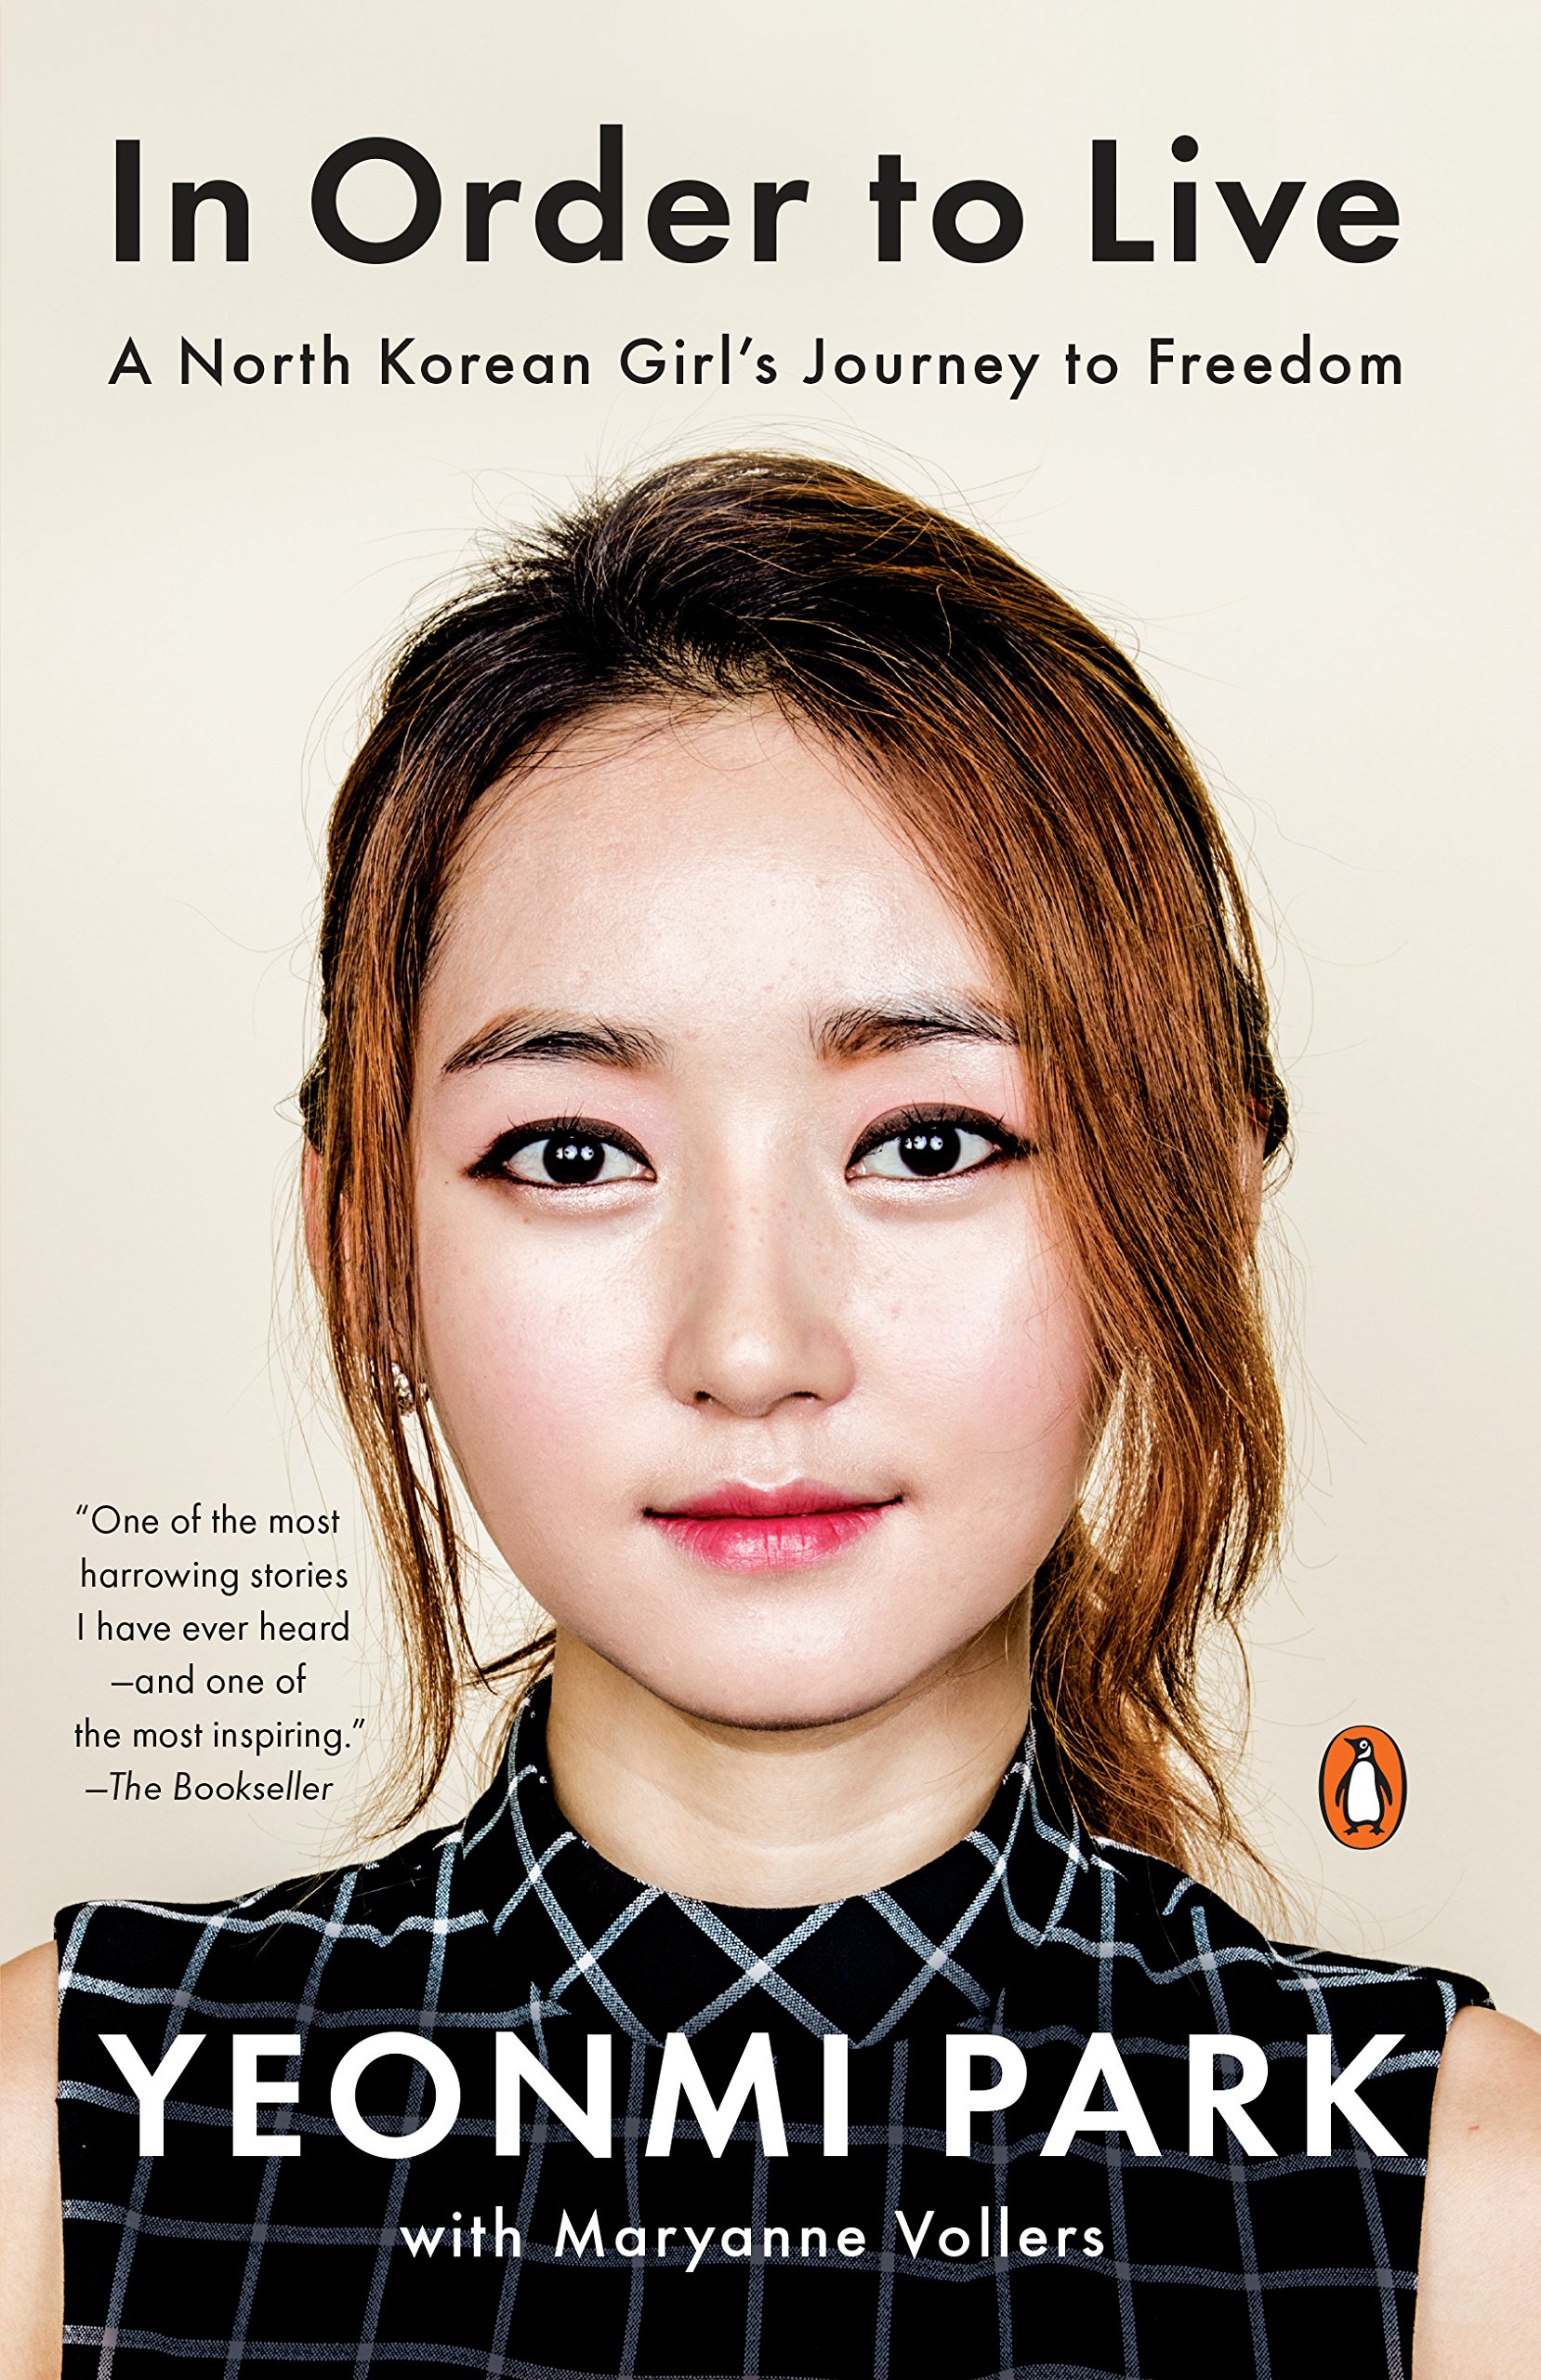 In Order to Live: A North Korean Girl's Journey to Freedom (eBook) by Yeonmi Park, Maryanne Vollers $1.99